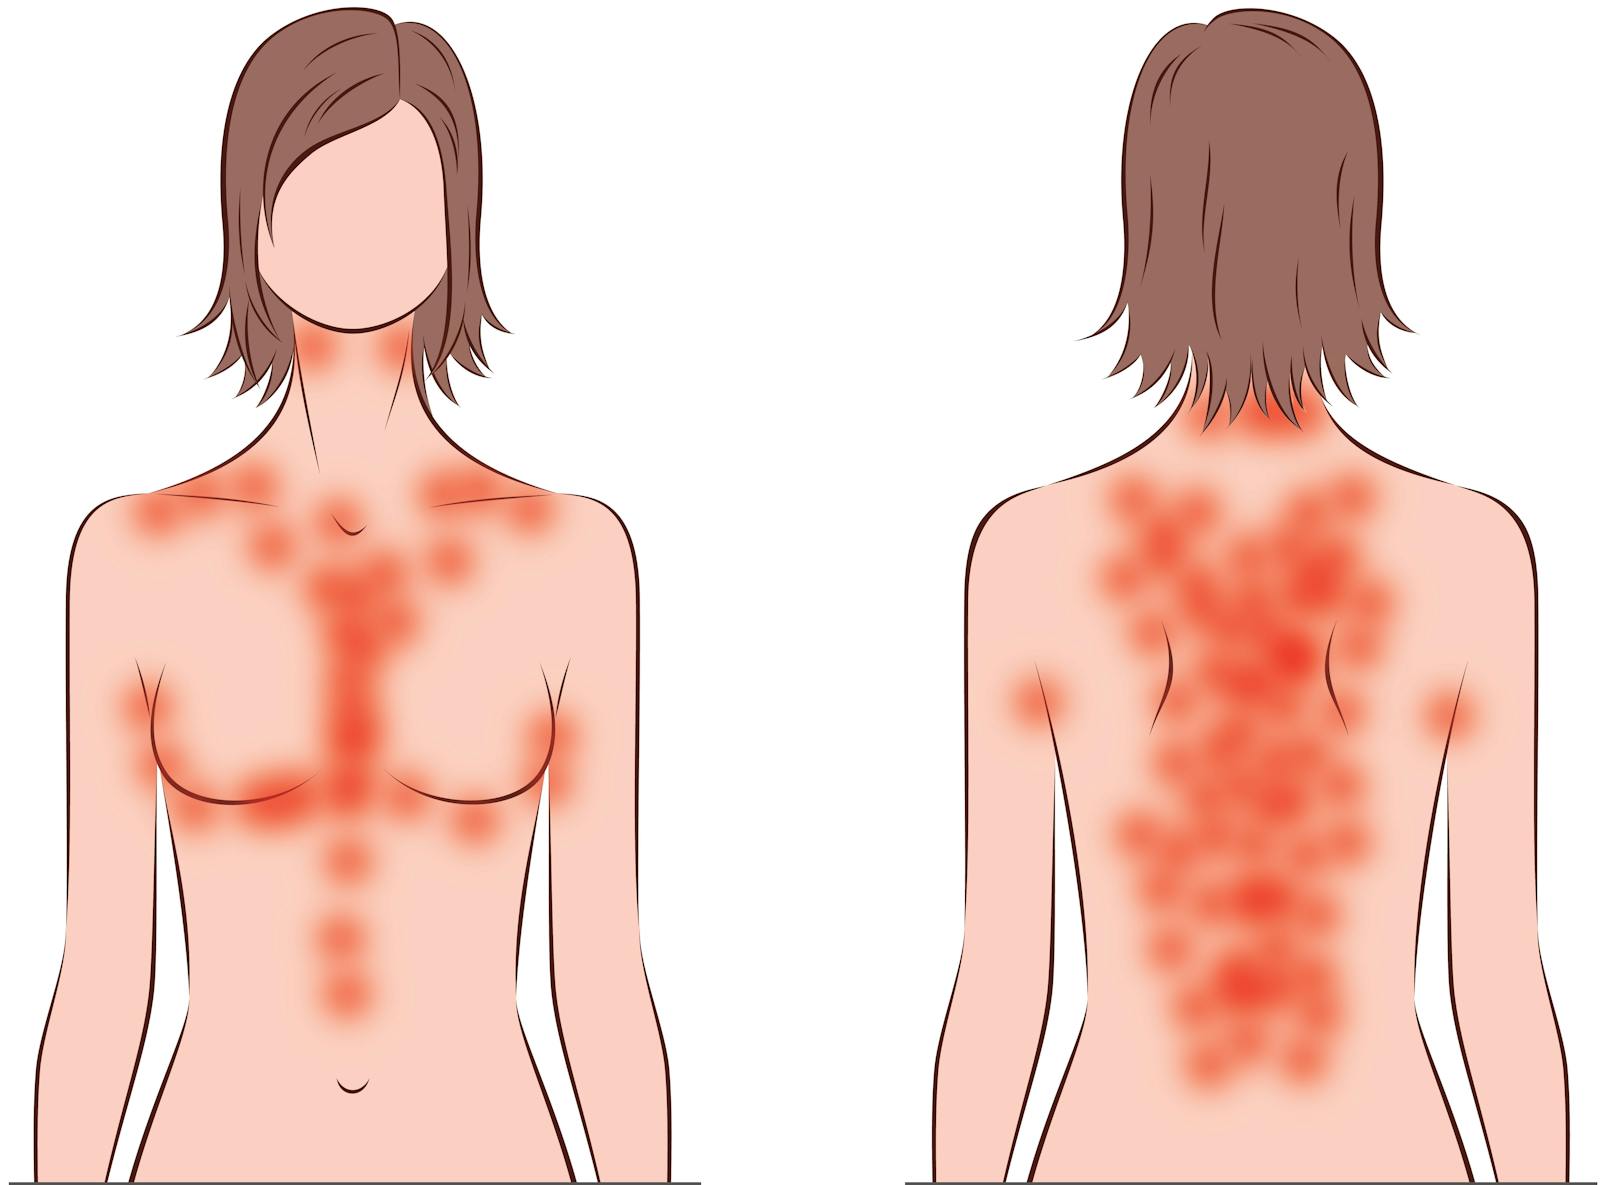 Upper Thigh Connect To Torso. What Area Of Body / Keto Rash - Why You May Itch on Low Carb, and What to Do ...